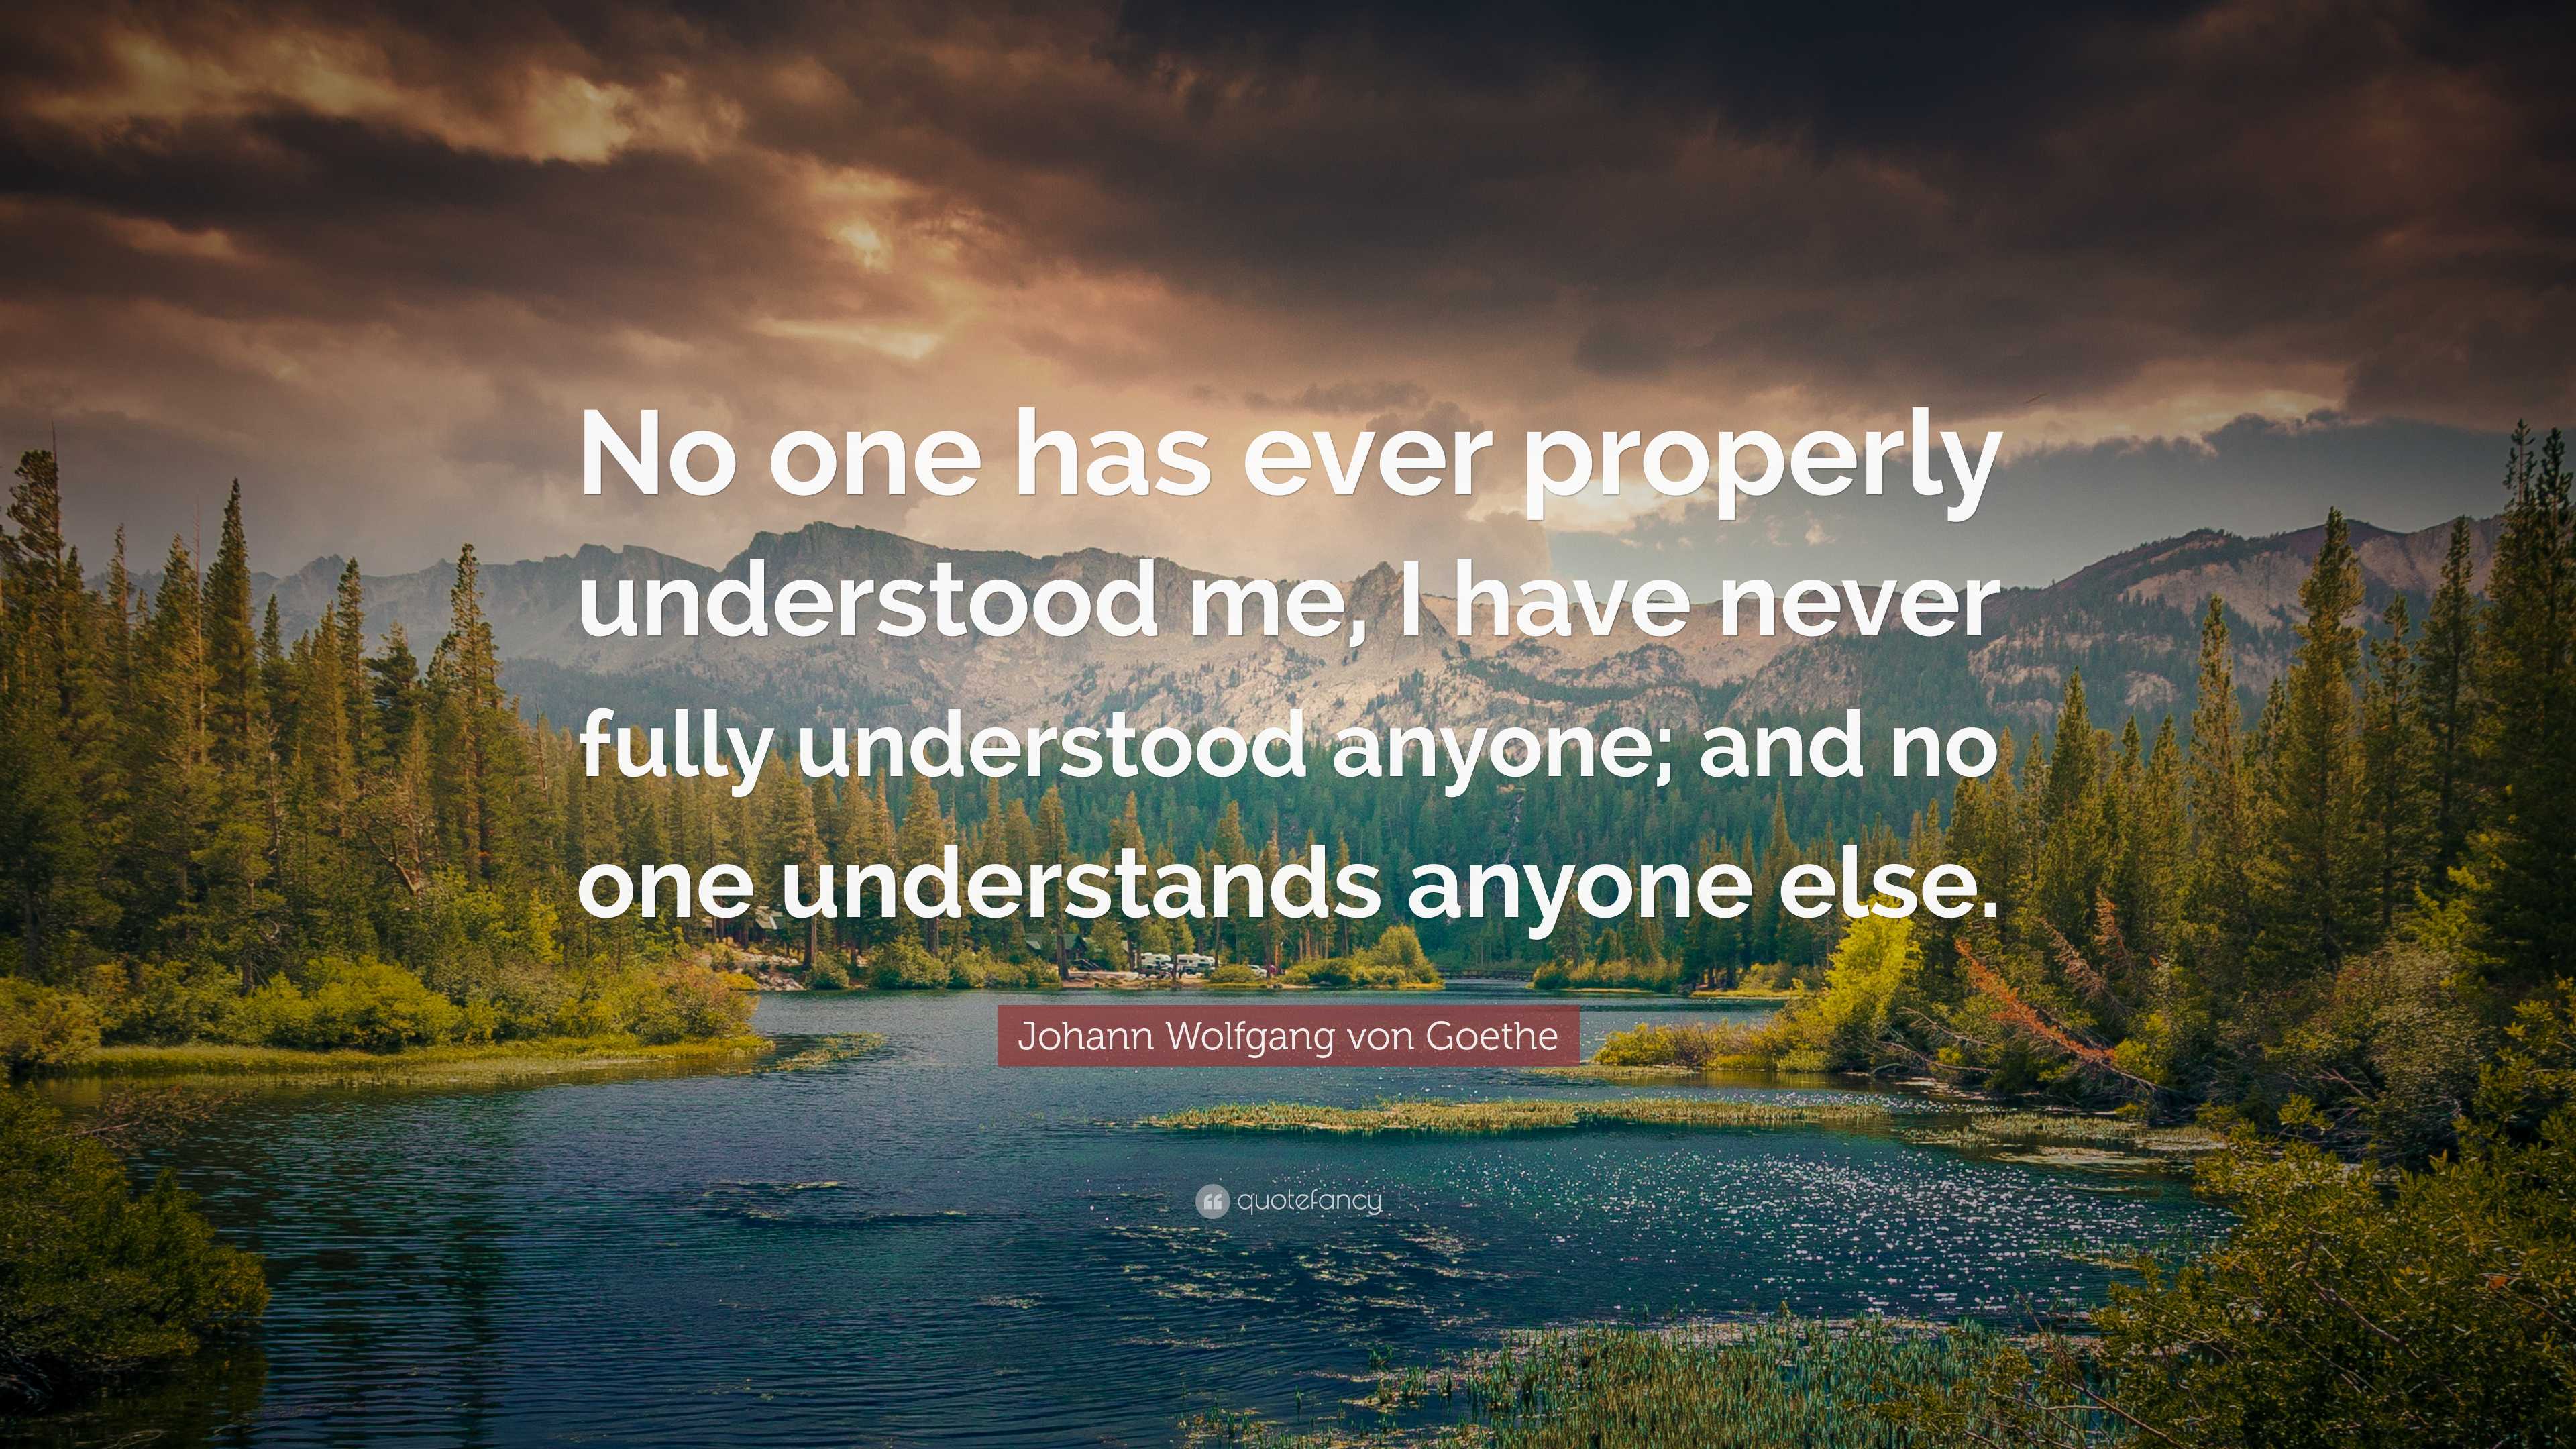 Johann Wolfgang von Goethe Quote: “No one has ever properly understood ...